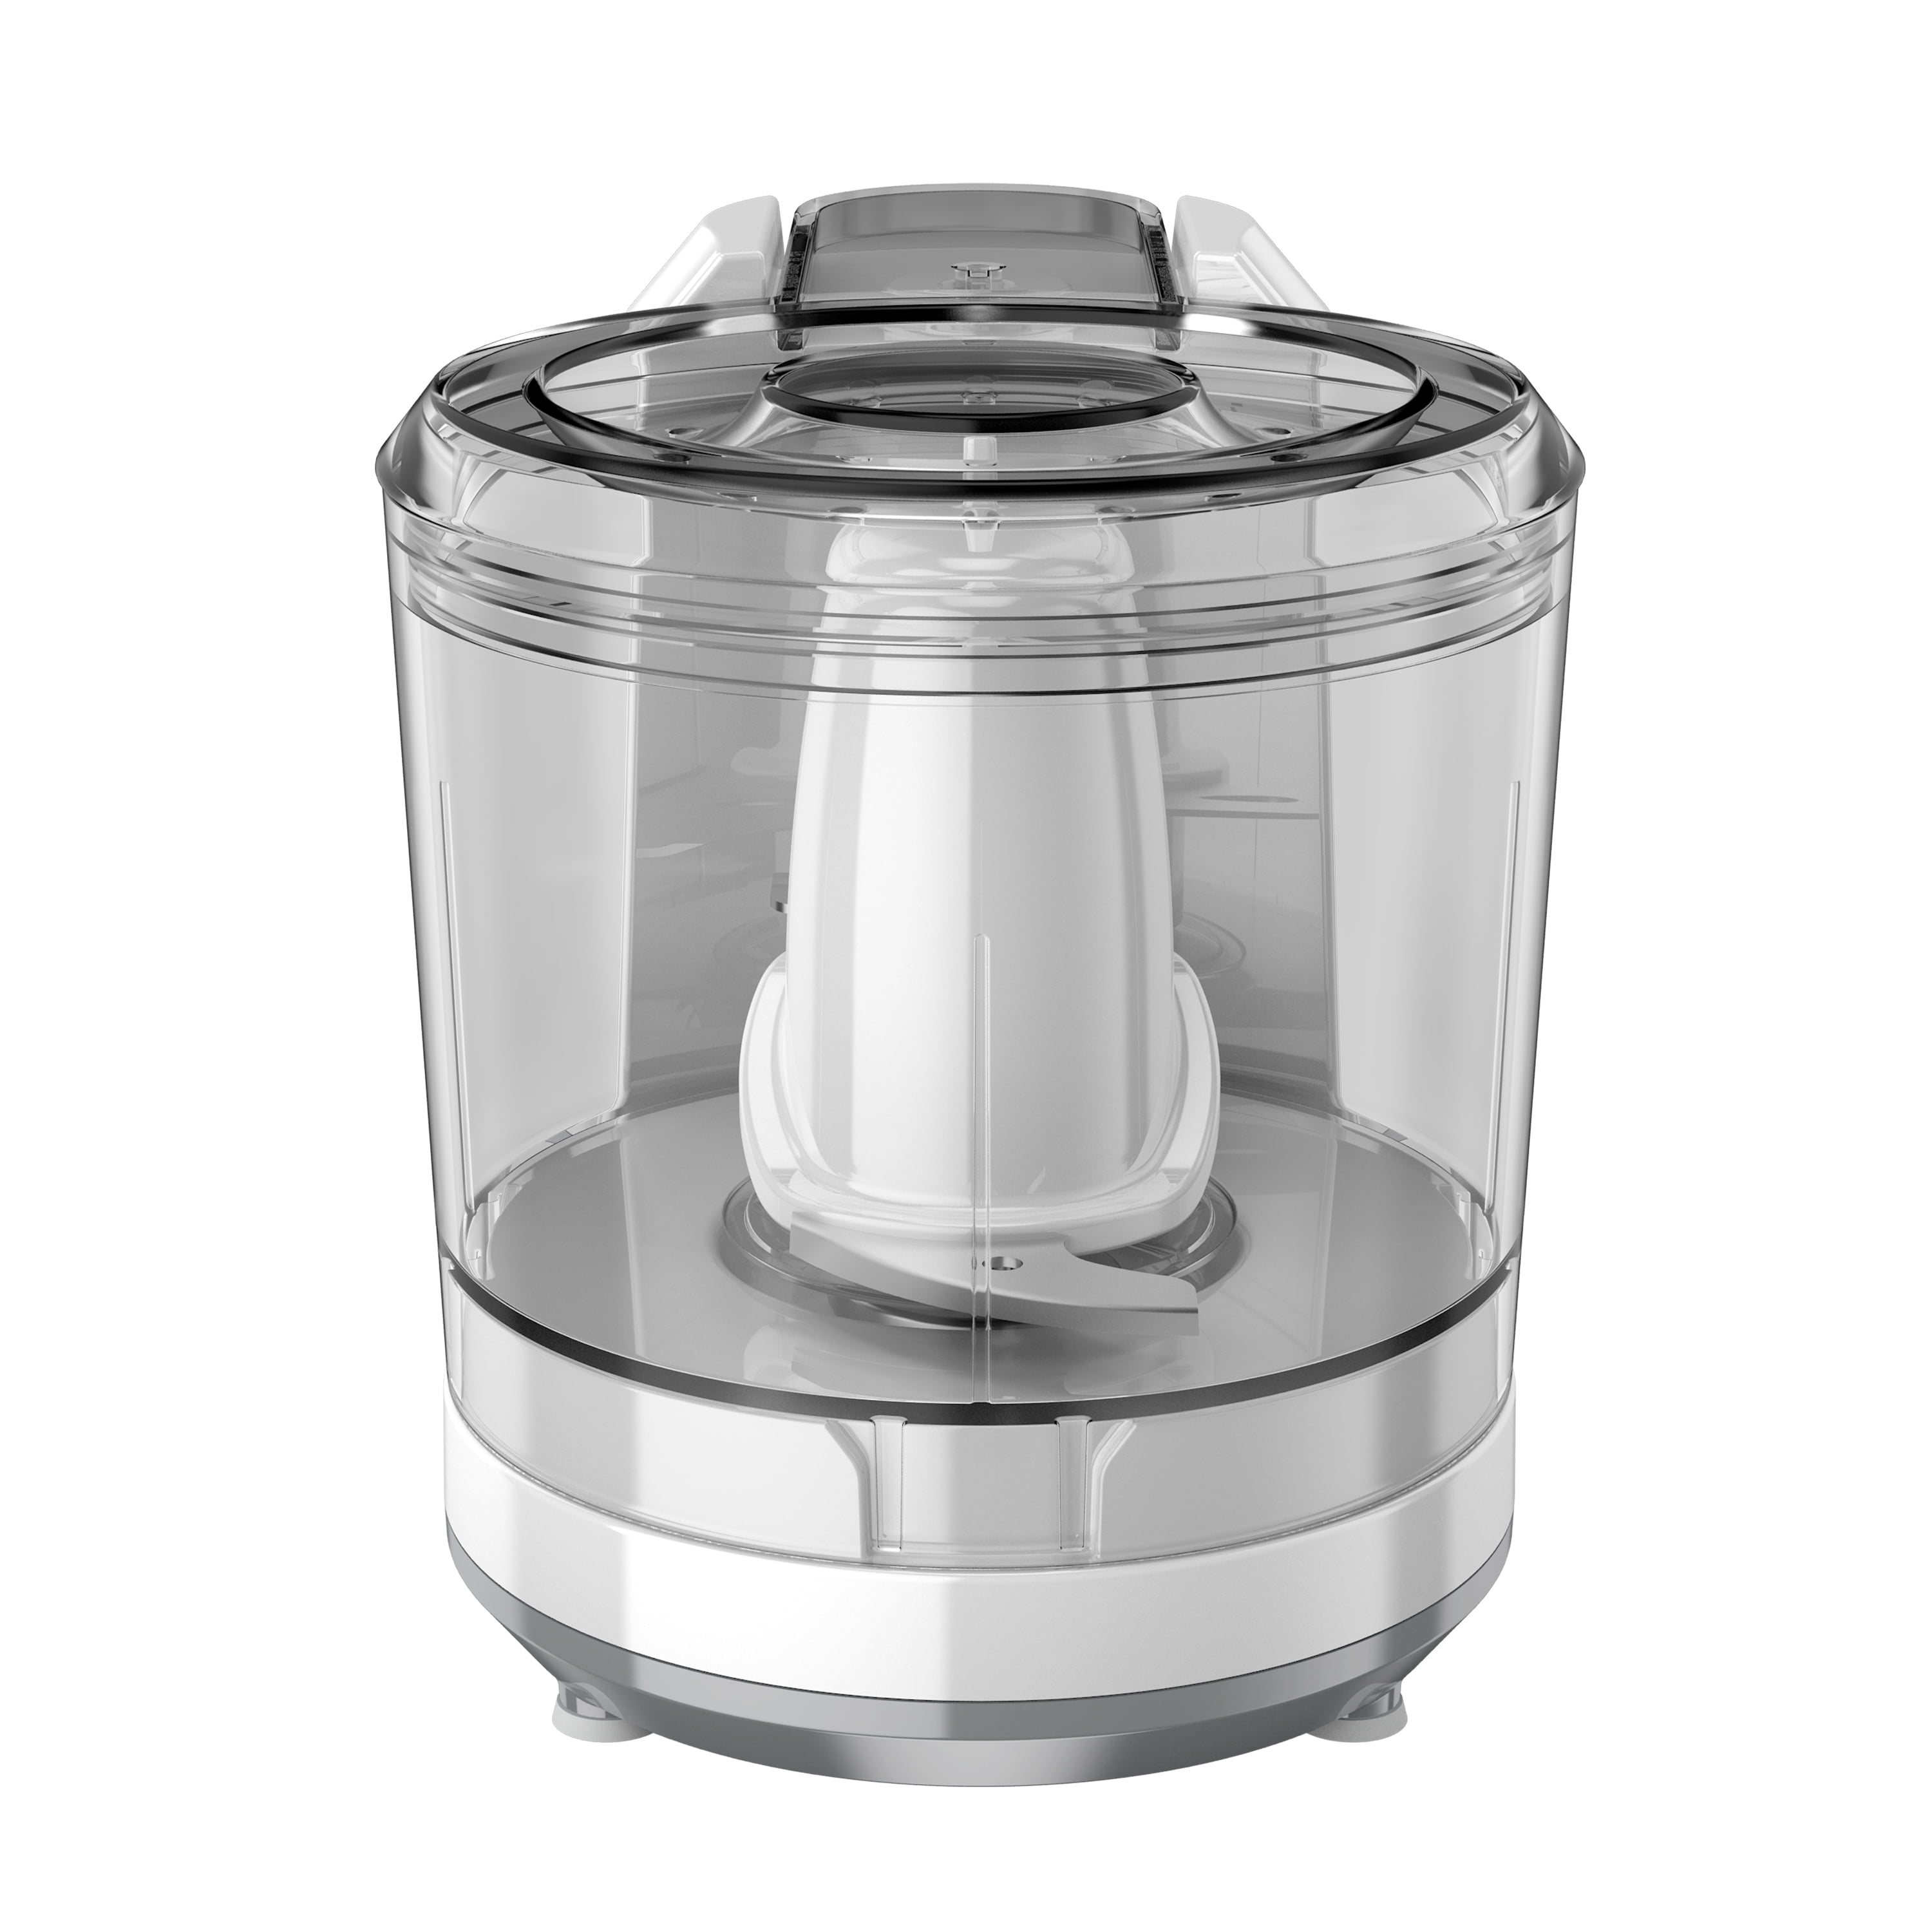 Black & Decker - 1.5-Cup One-Touch Electric Chopper in White (HC306)